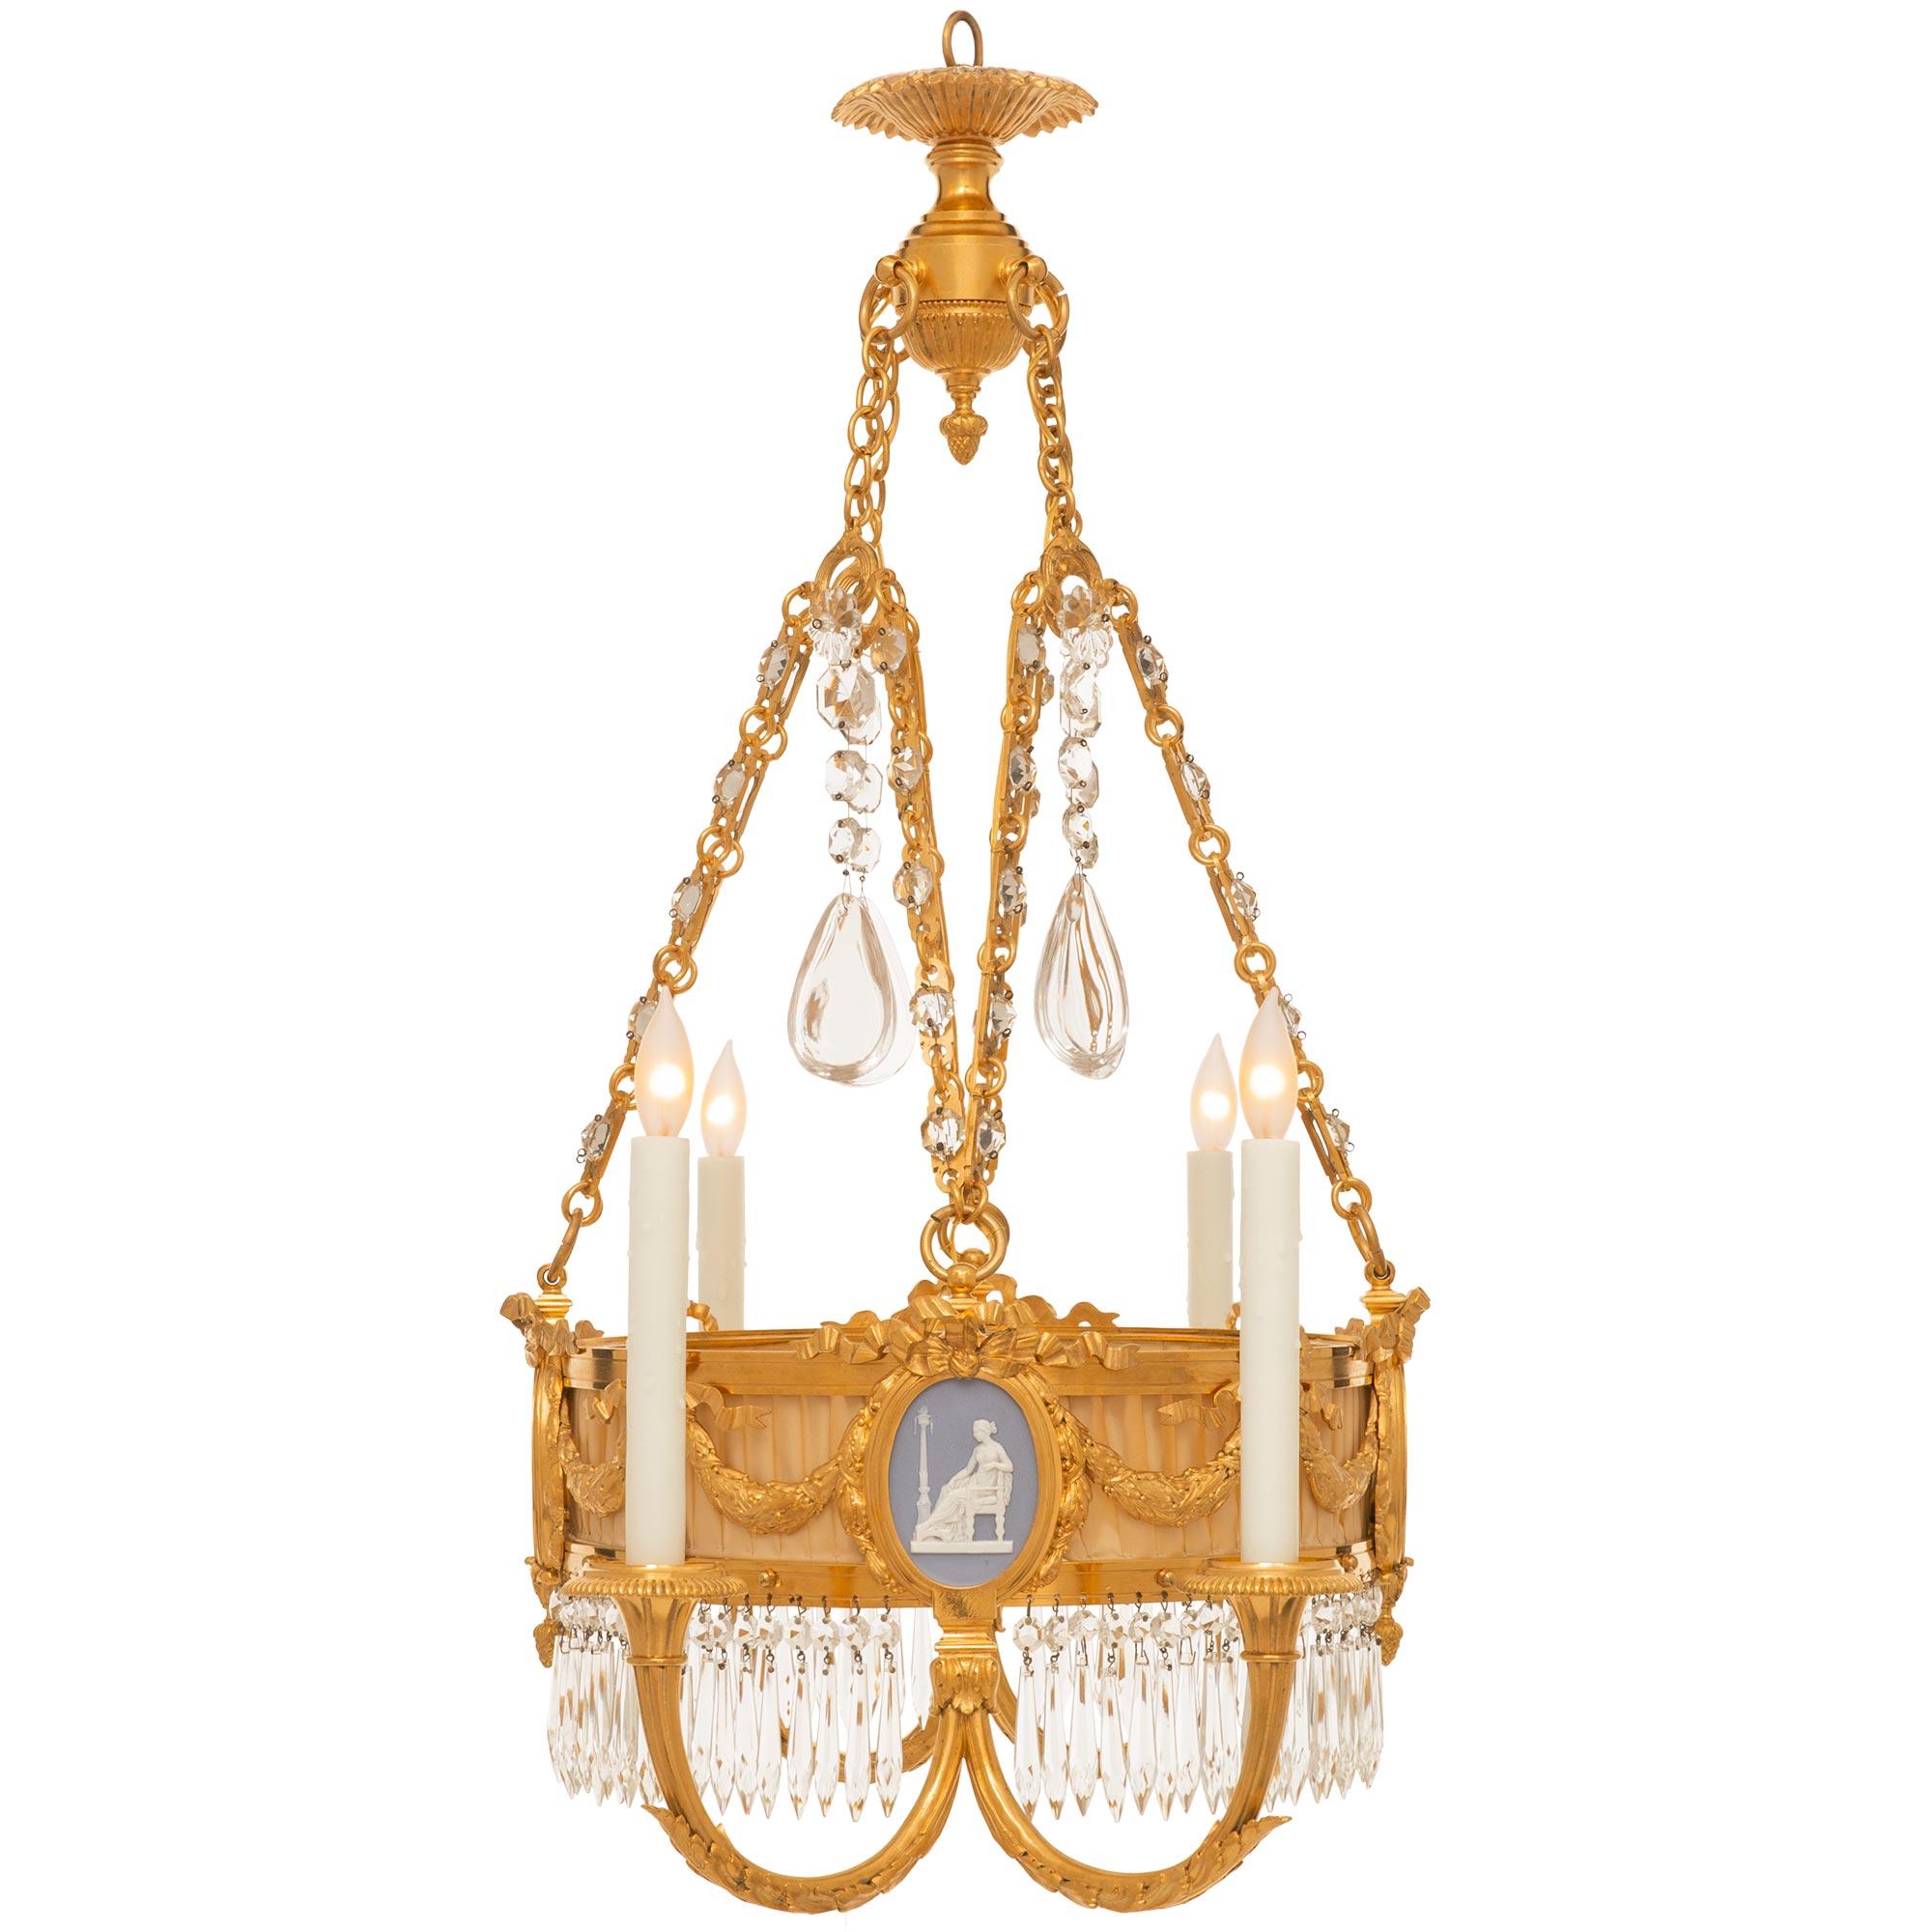 


A most elegant French 19th century Louis XVI st. ormolu, Wedgwood porcelain and crystal chandelier. The six light chandelier has a central circular ormolu frame decorated by swaging berried laurel garlands which are held up by large bows. The